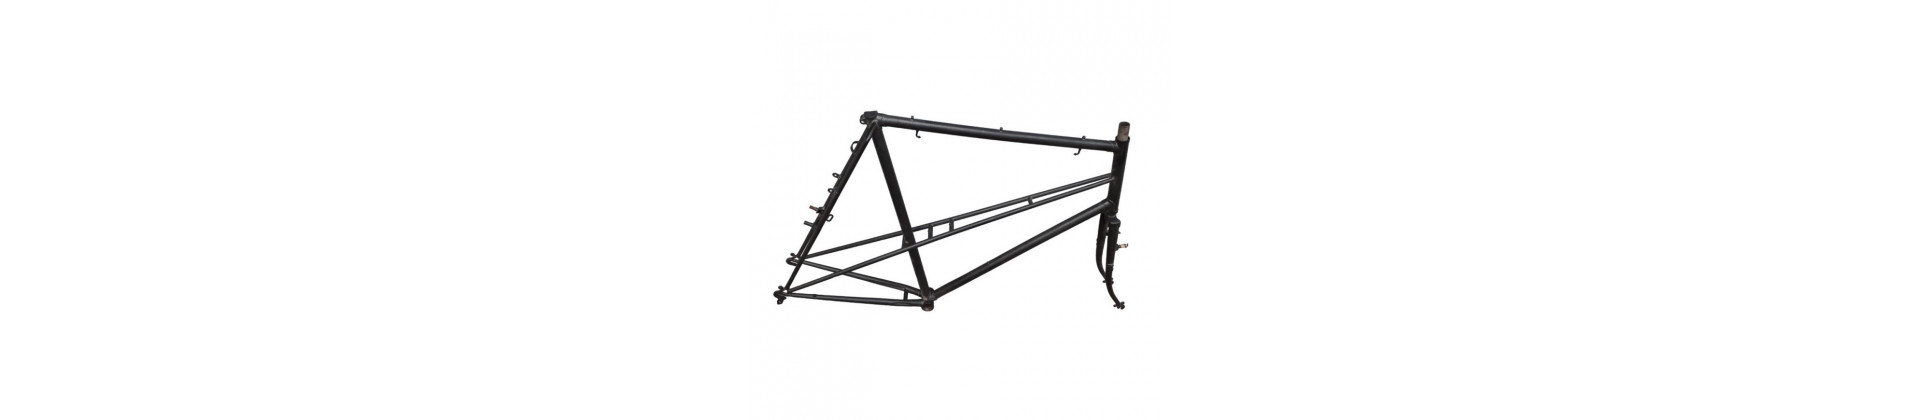 Old bicycle frame